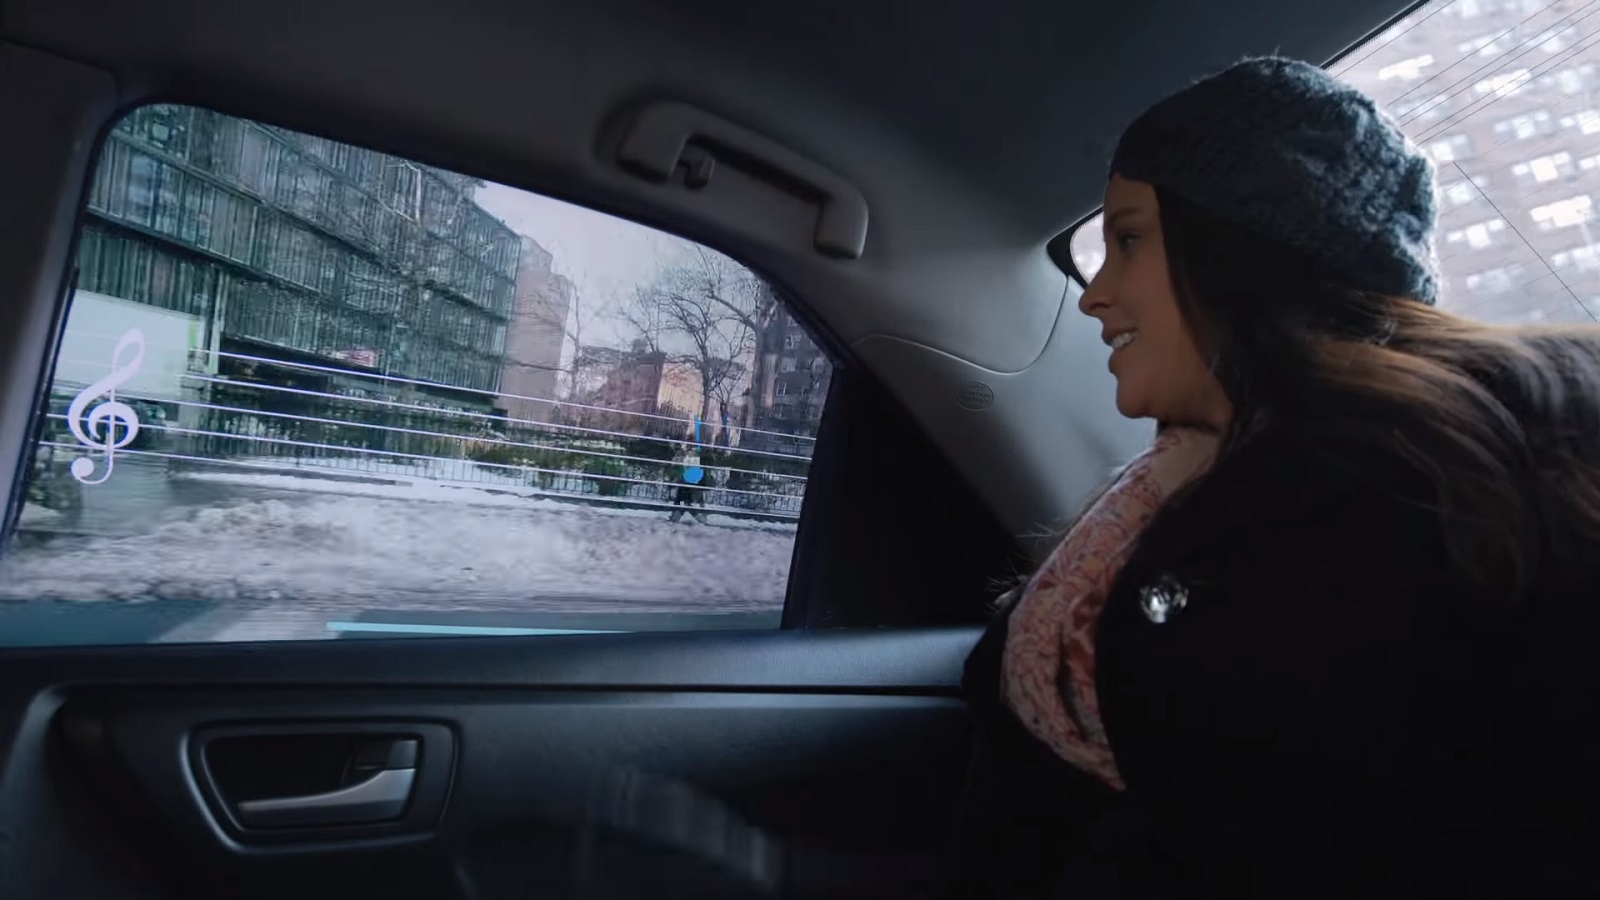 New York’s Joyous Voice Gets Recorded in Uber Backseat